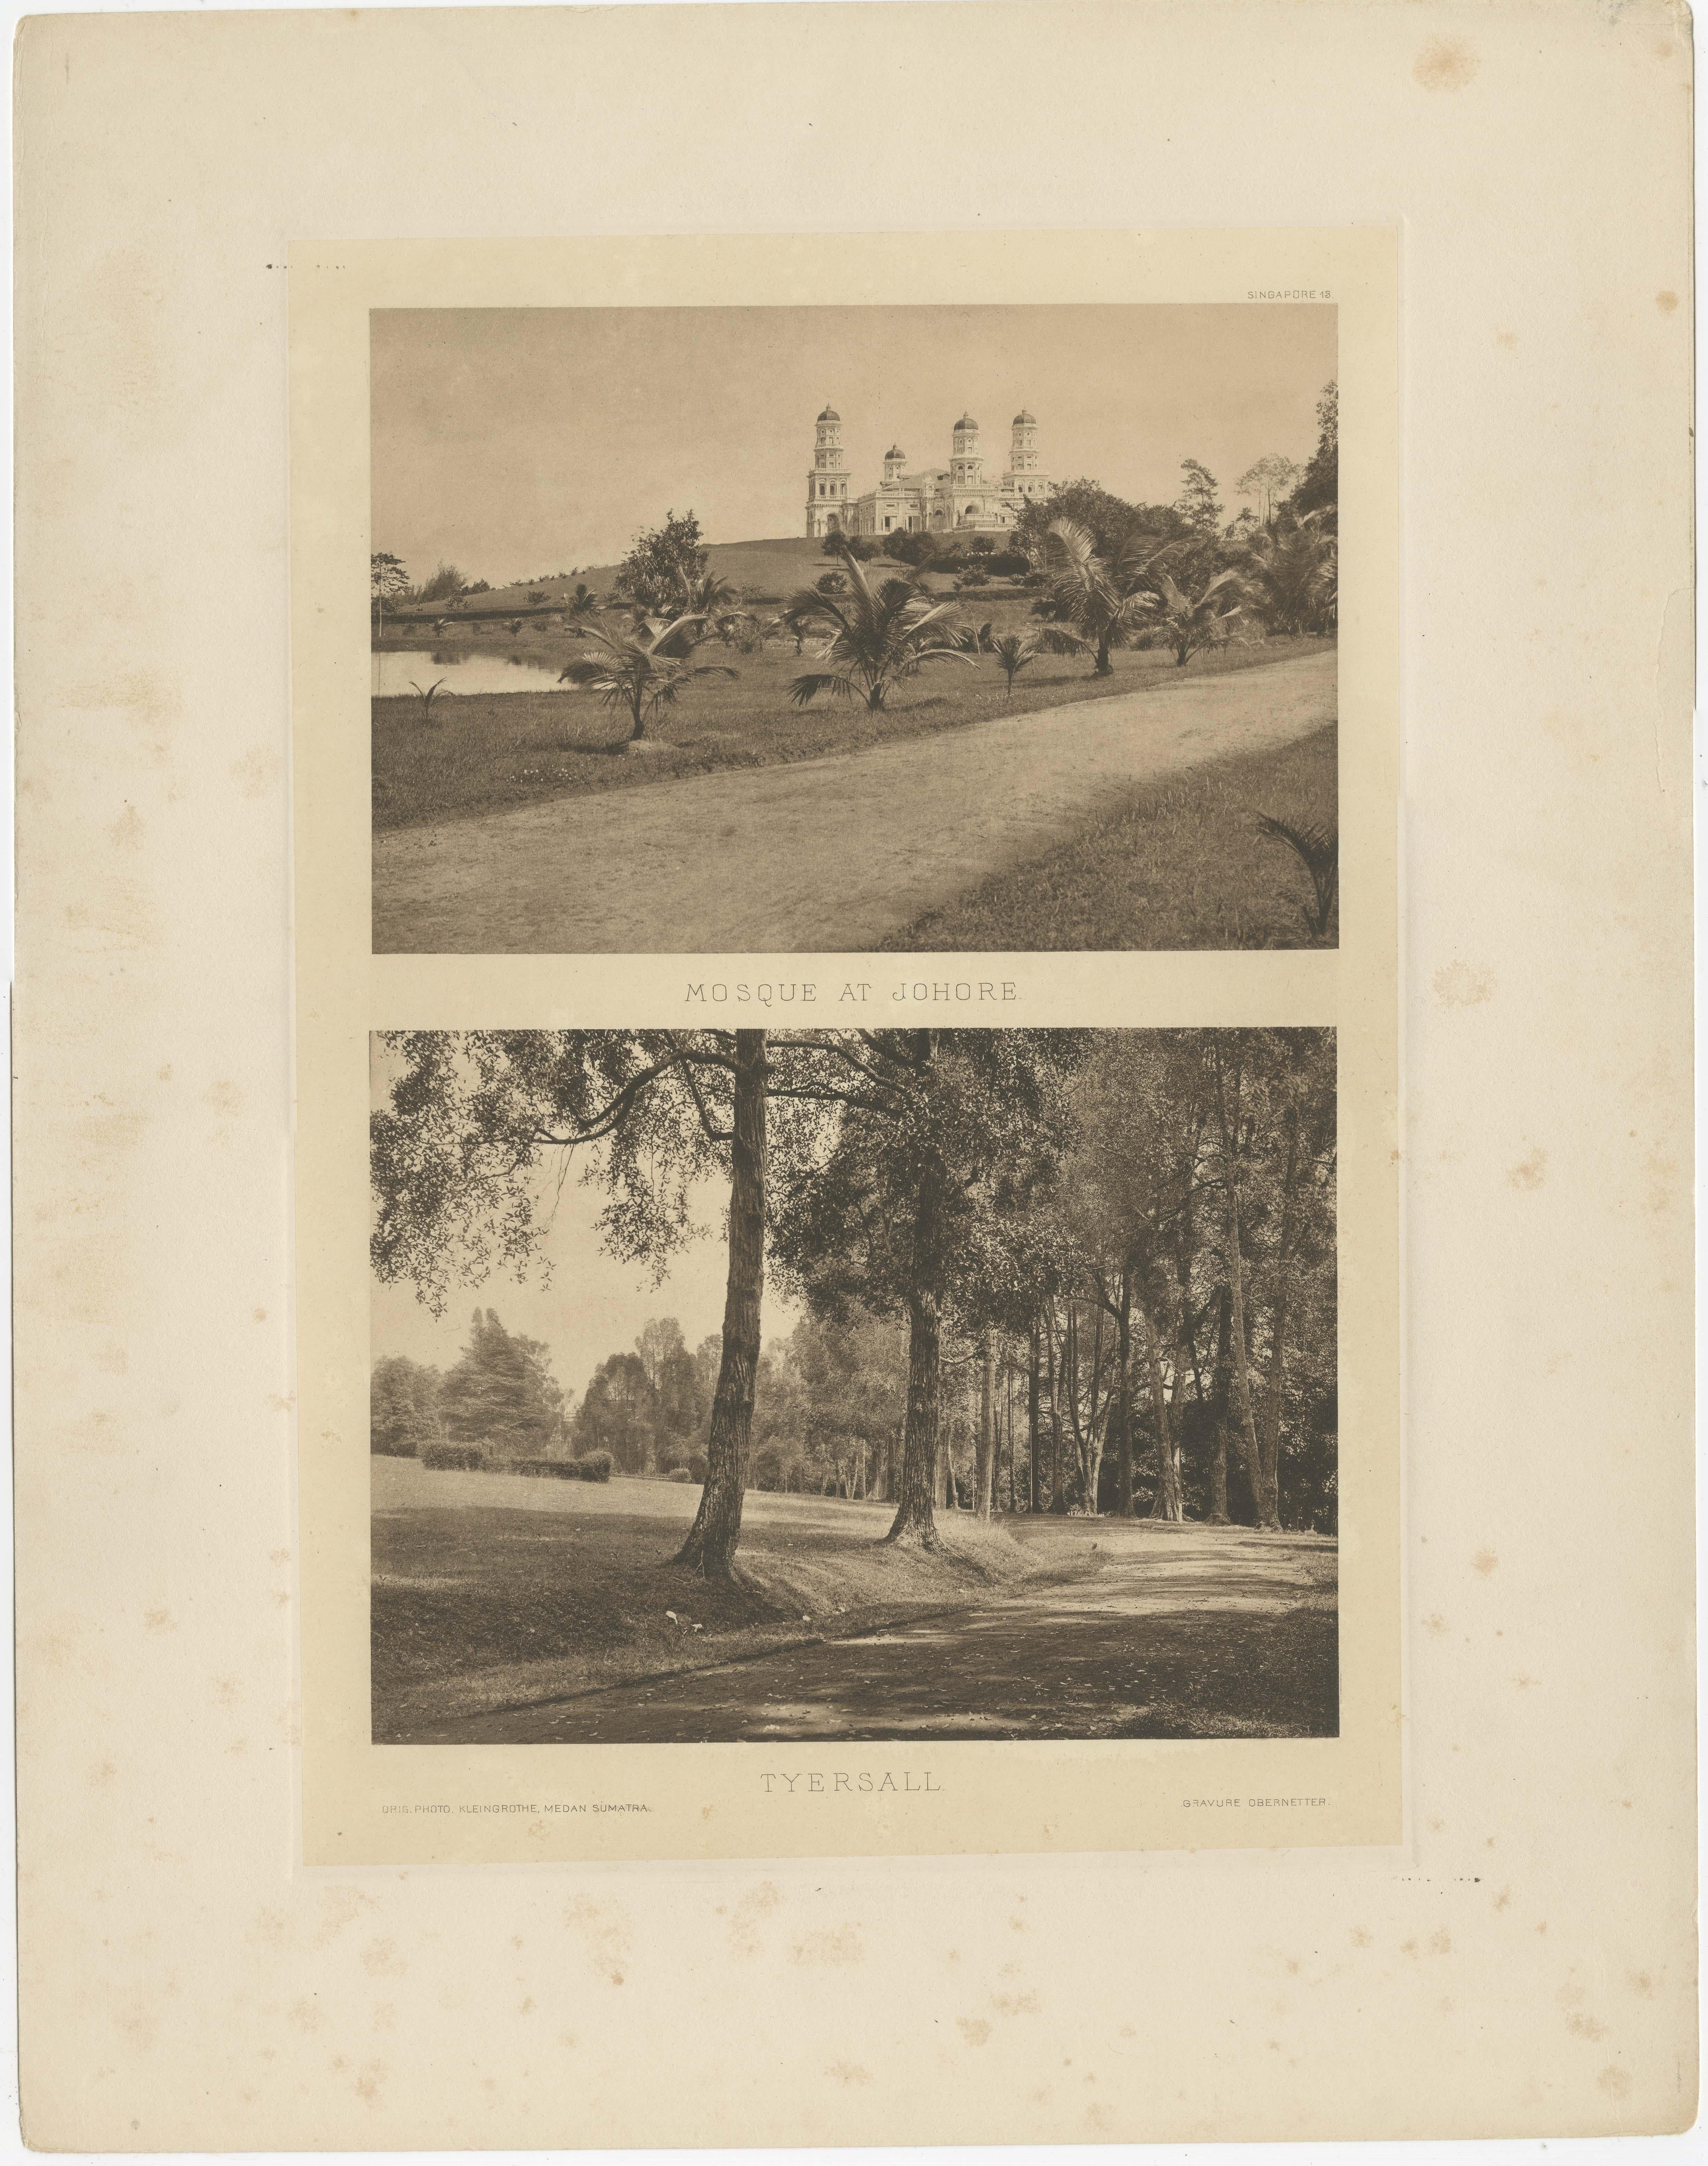 Rare views of early Singapore and Johore in 1907. 

1) Mosque at Johore
2) Tyersall

Ad 2: Tyersall Park is a historical estate in Singapore, bound by Holland Road and Tyersall Avenue, near the Singapore Botanic Gardens. It was private land